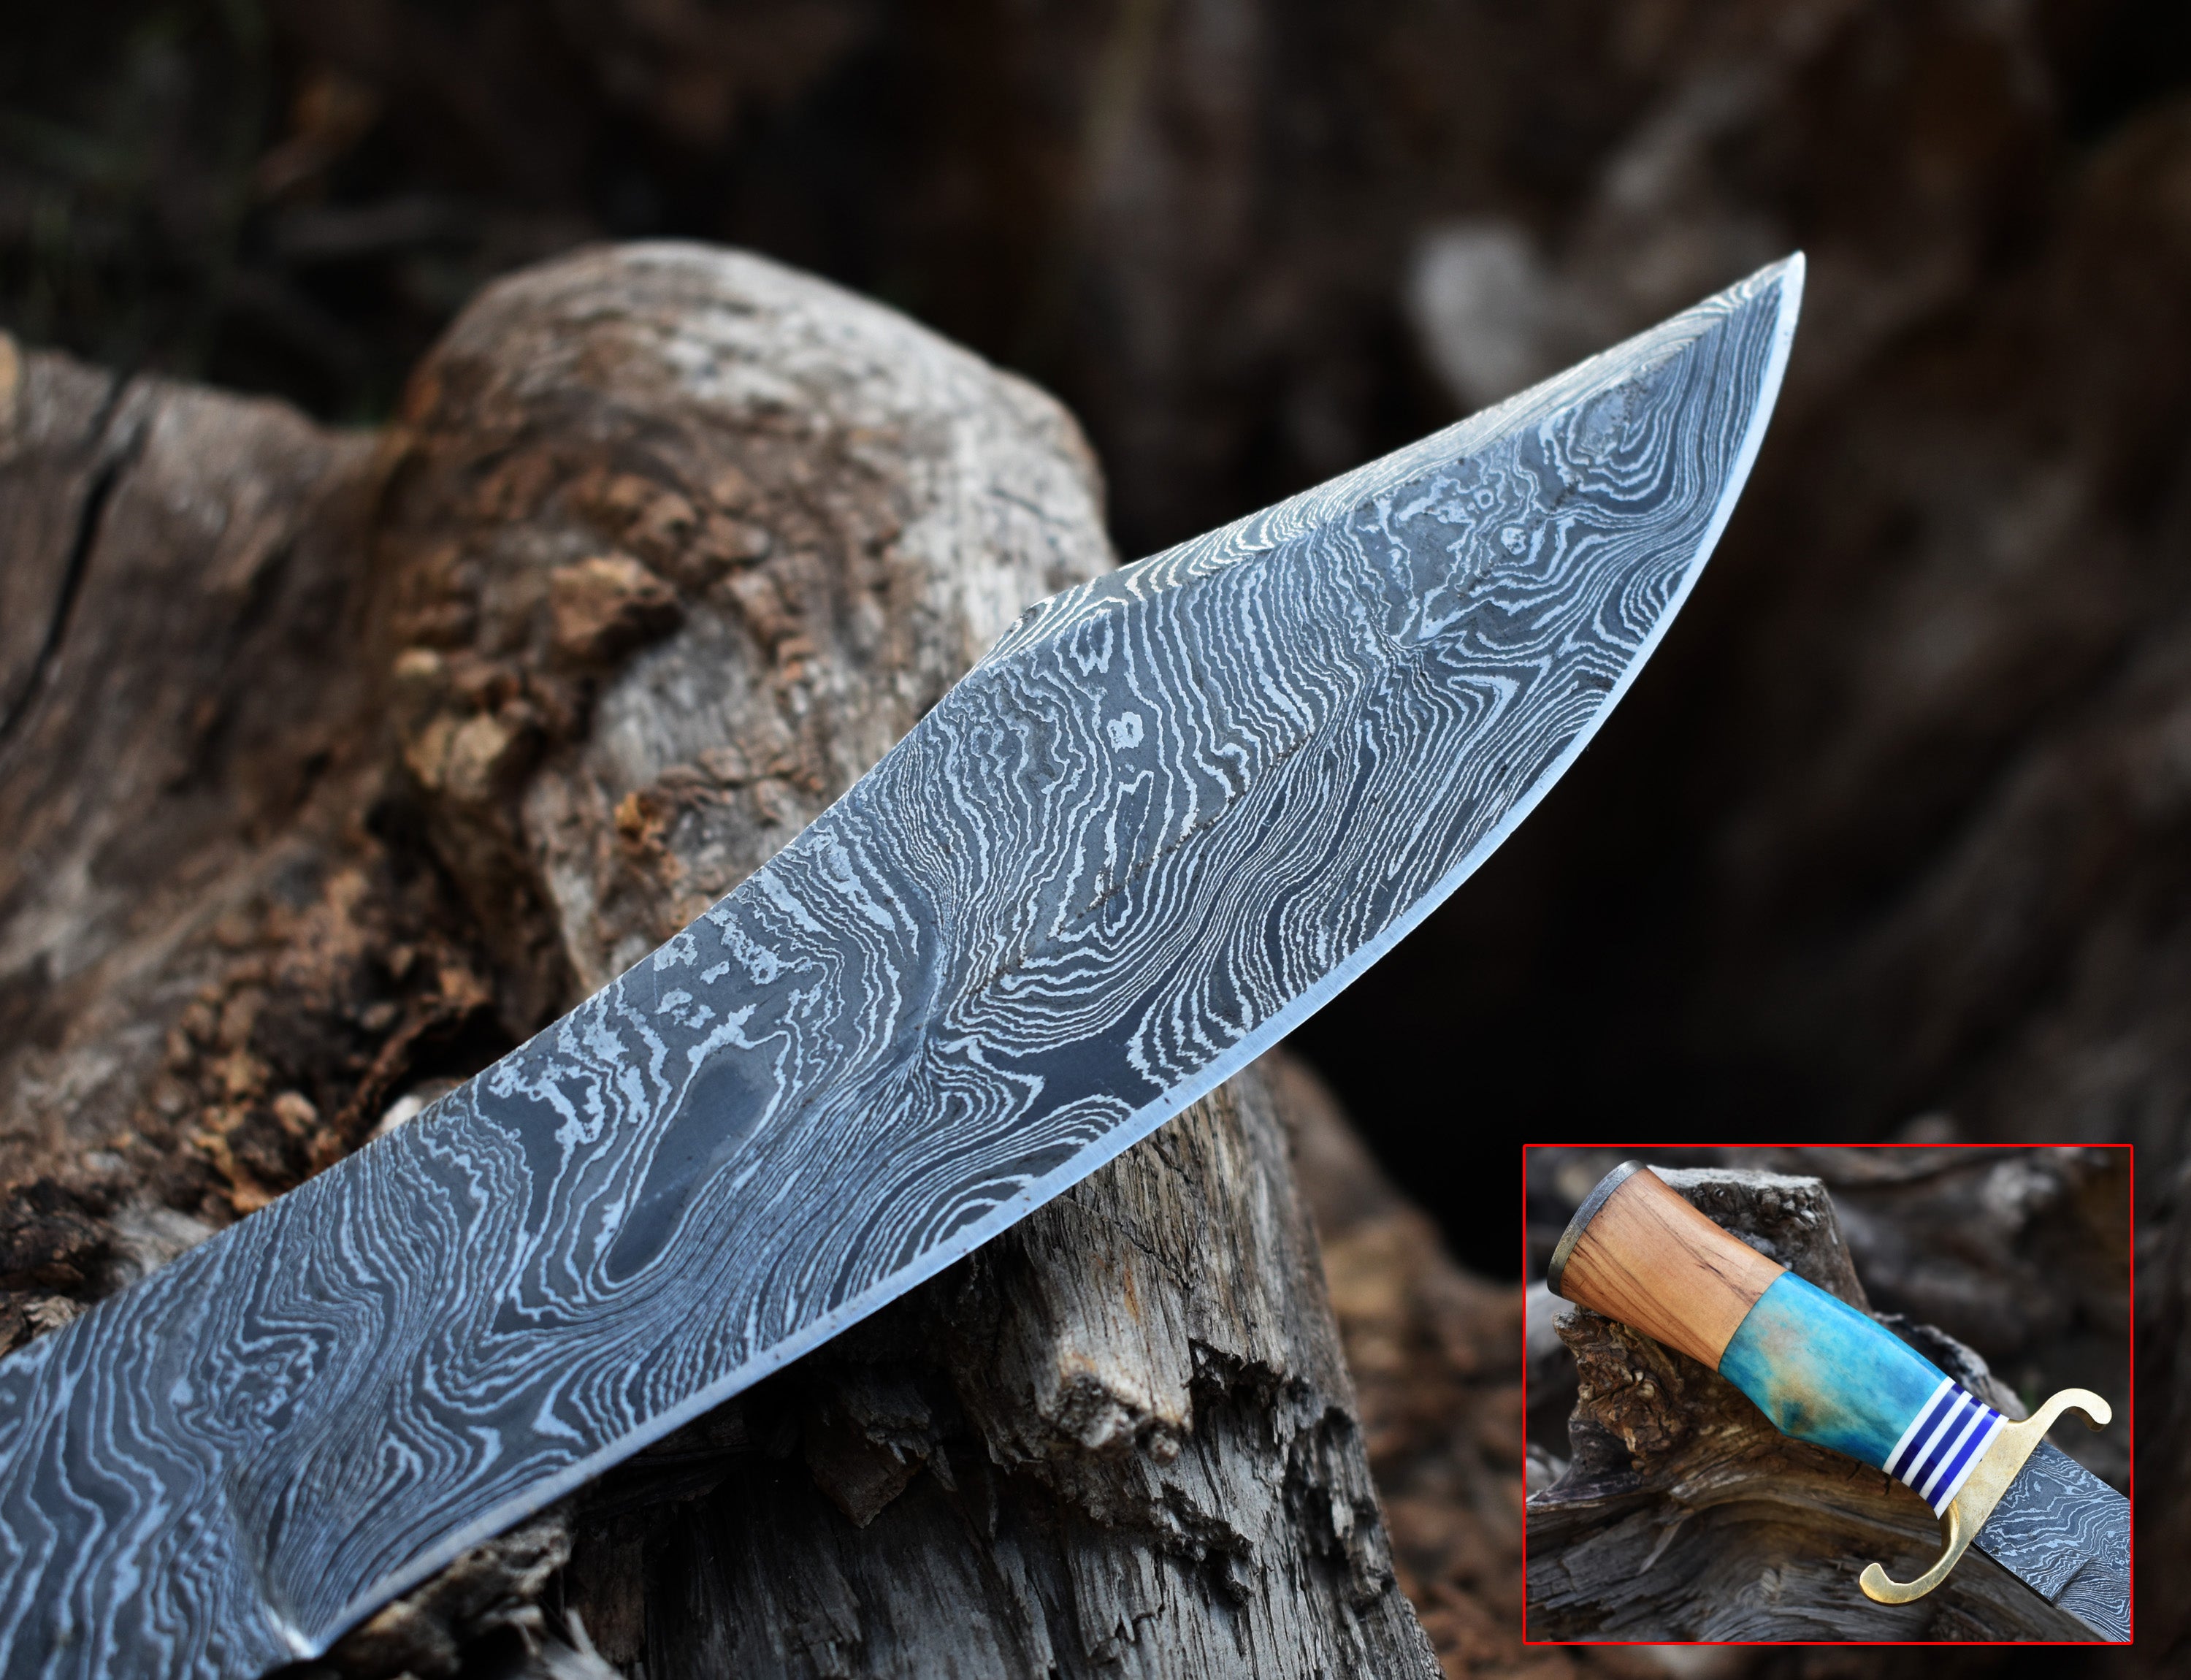 Damascus Hunting knife with Wood and  Bone Handle Hunting Bowie knife With Brass Guard & Pommel